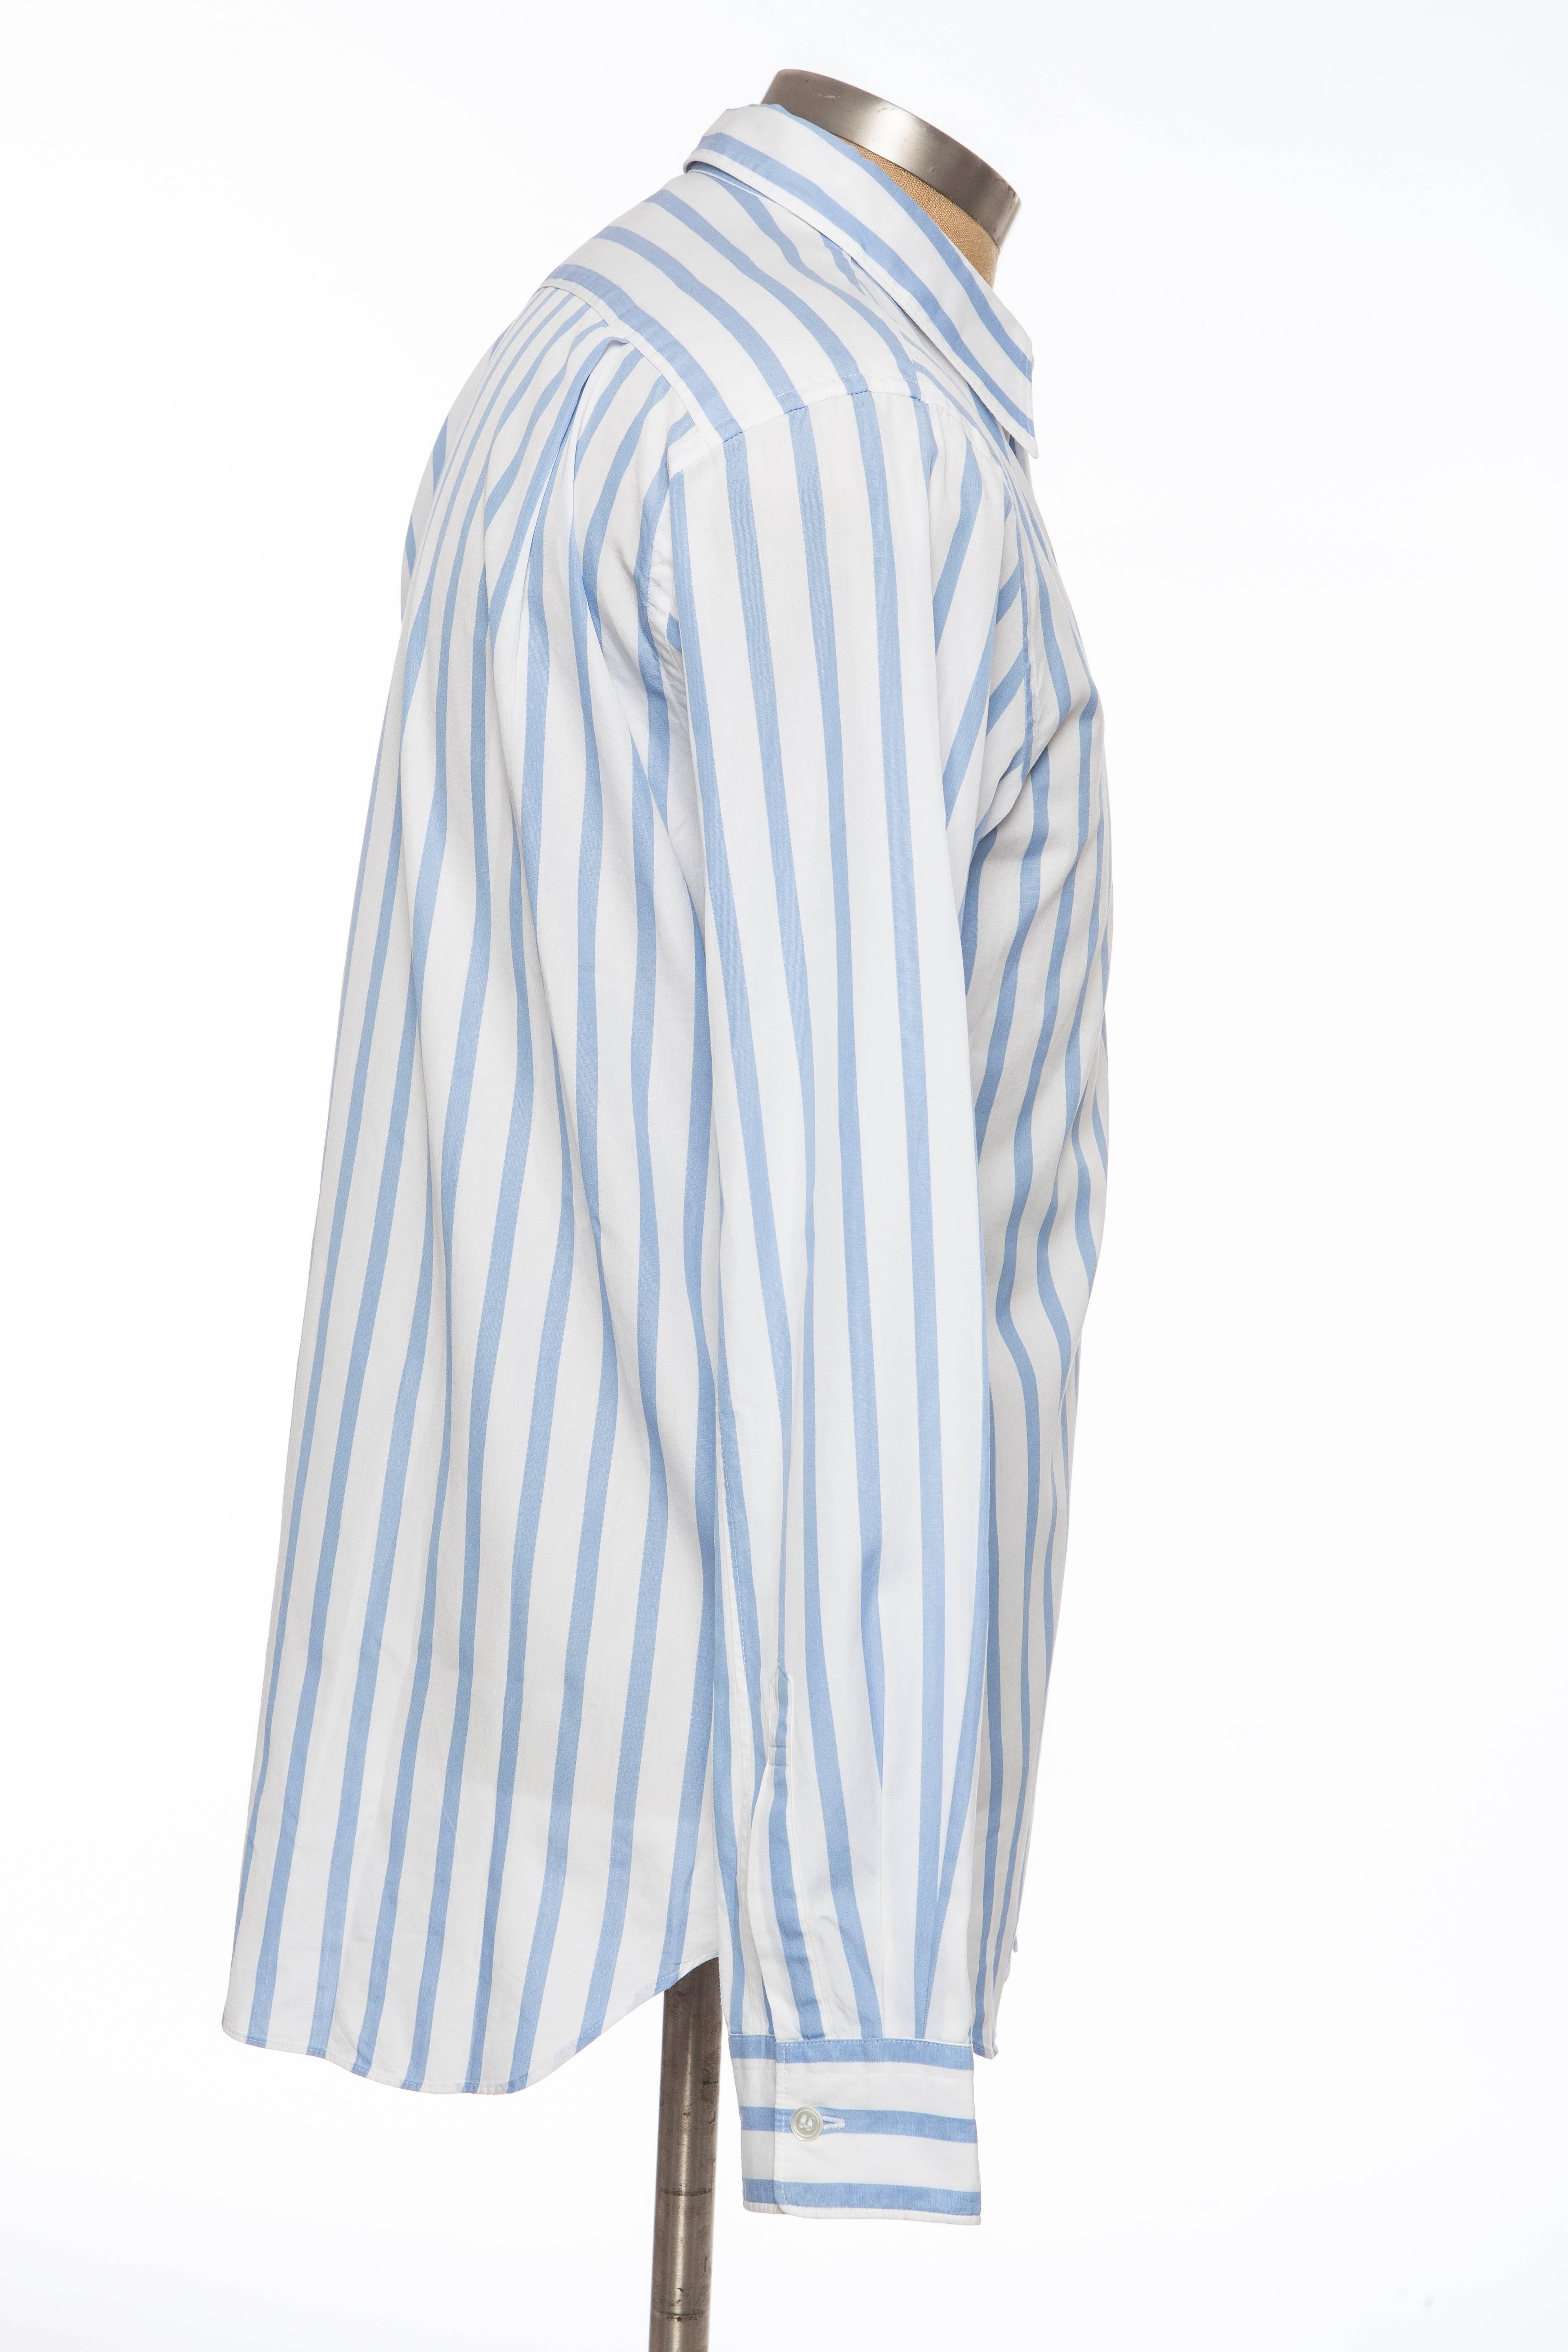 Comme des Garçons Homme Plus, Spring-Summer 2006, striped, cotton shirt with pointed collars, long sleeves, patch pocket at chest, Rolling Stones logo graphic and button closure.

 Neck 15”, Chest 40”, Length 29.5”, Sleeve 32”